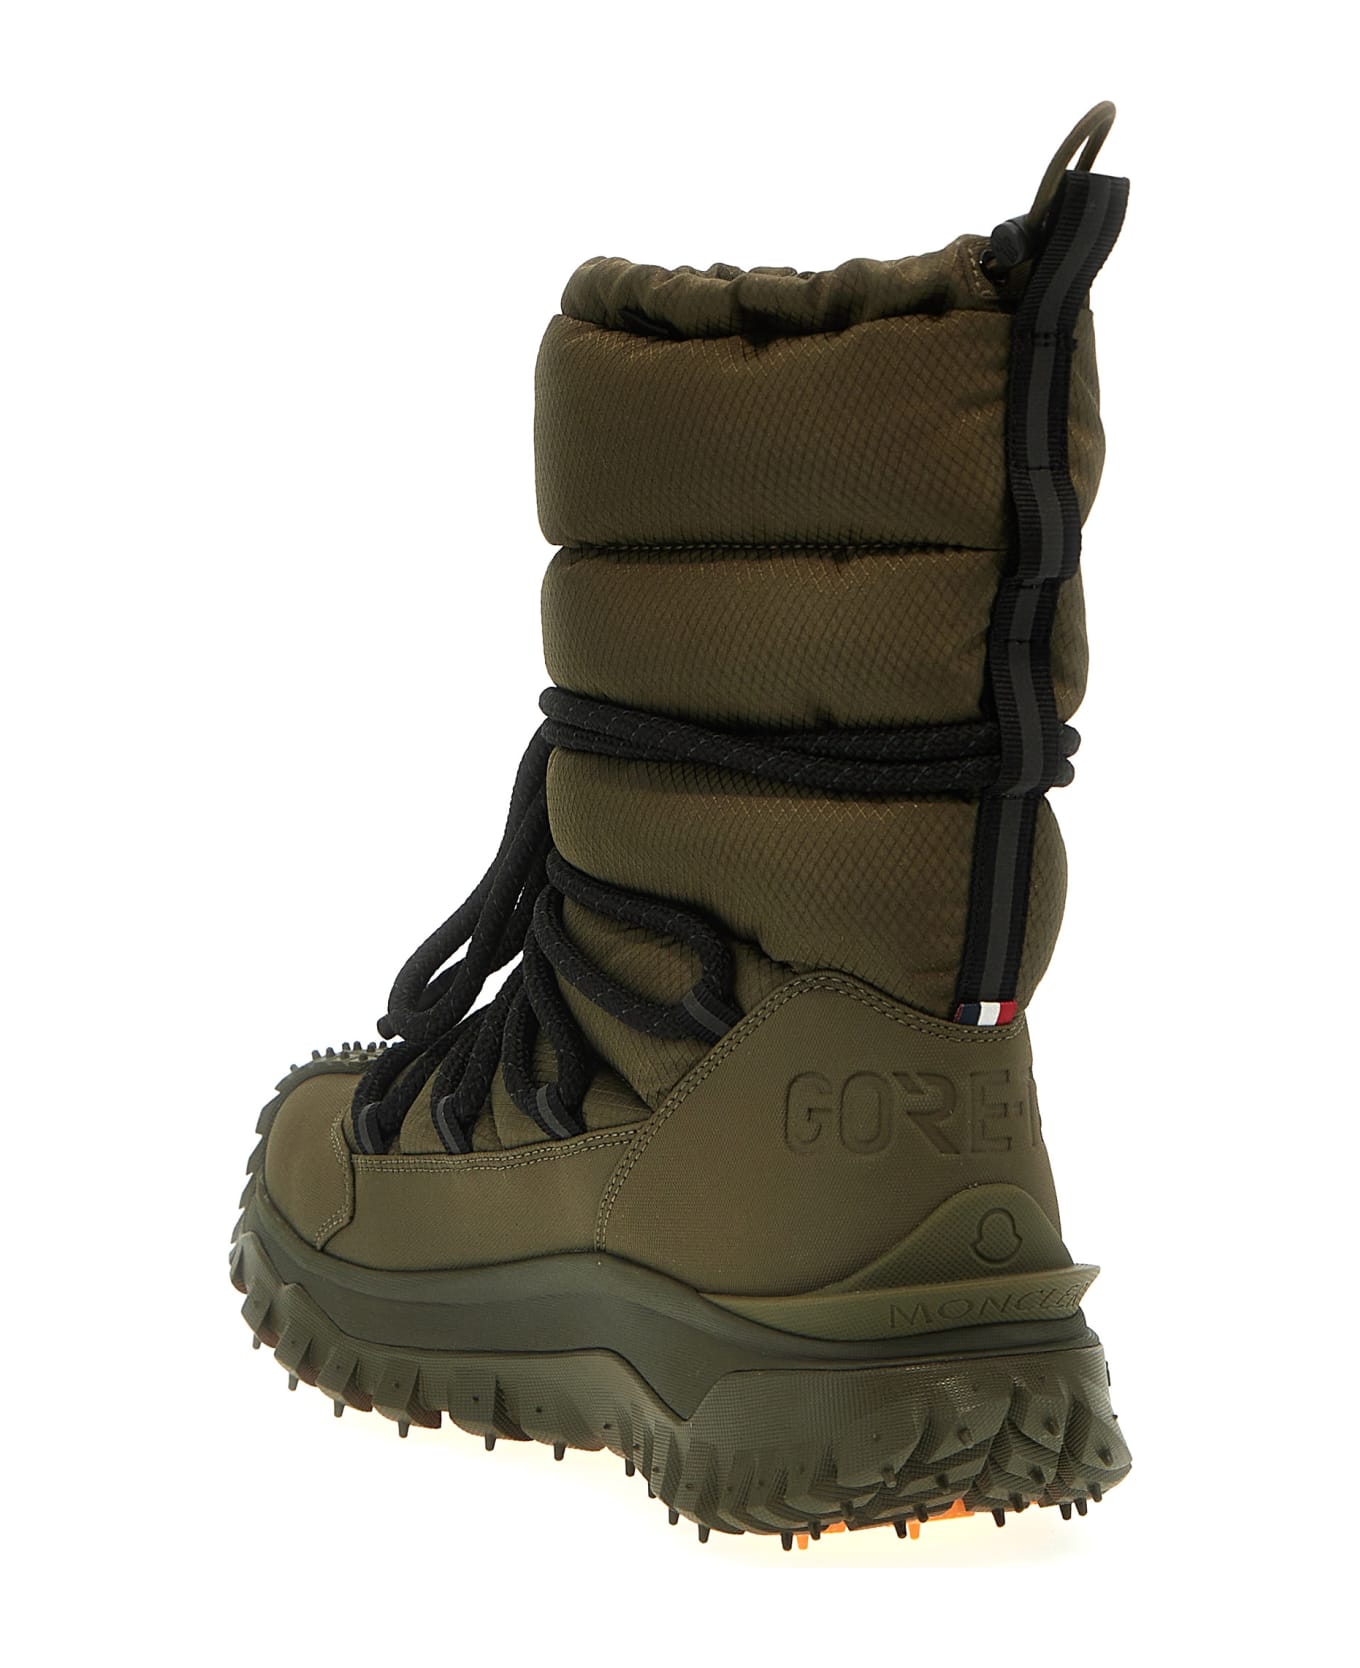 Moncler 'trailgrip Après' Ankle Boots - Green ブーツ